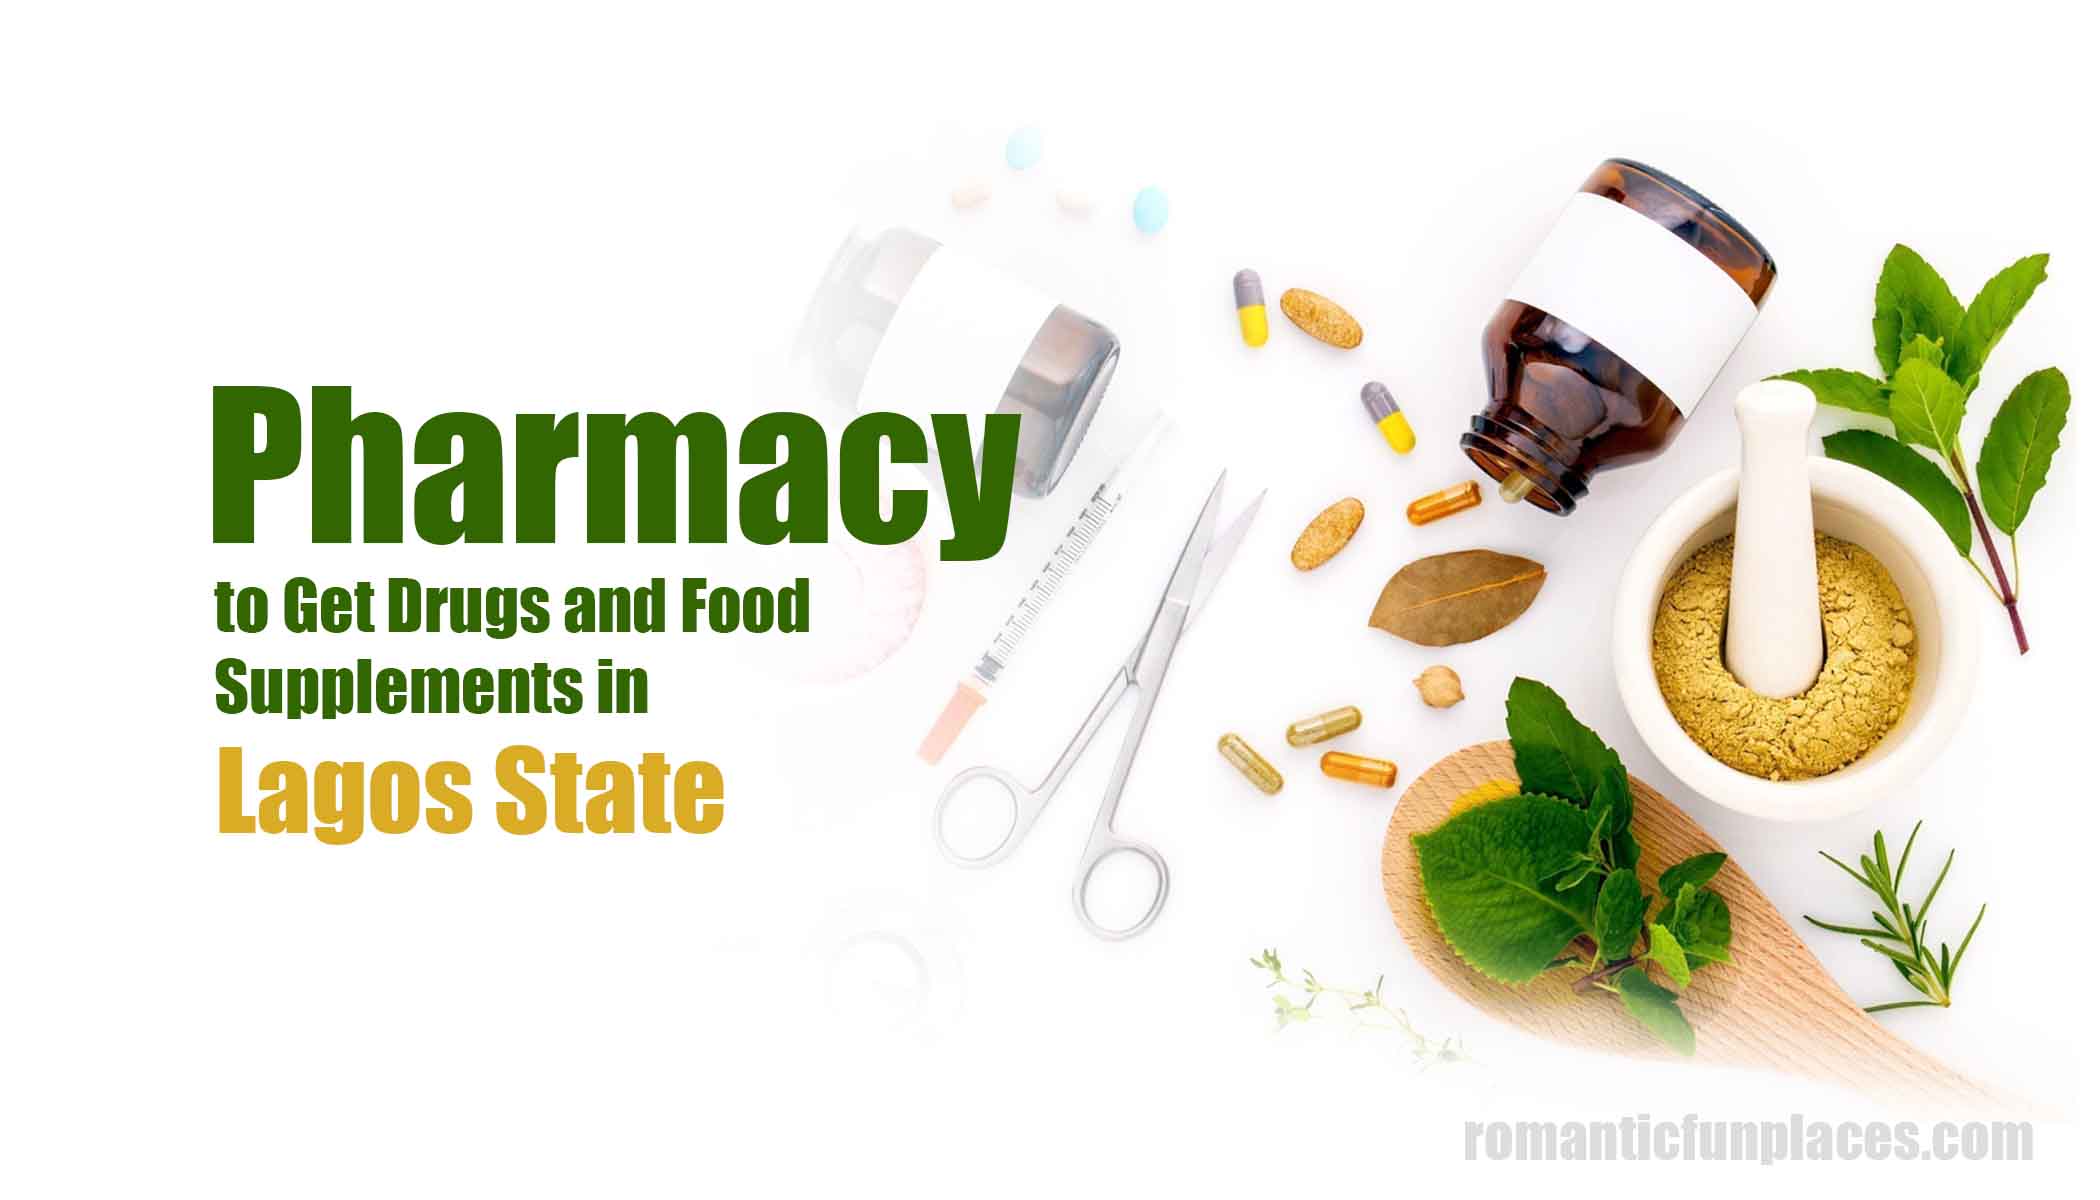 Pharmacy to Get Drugs and Food Supplements in Lagos State